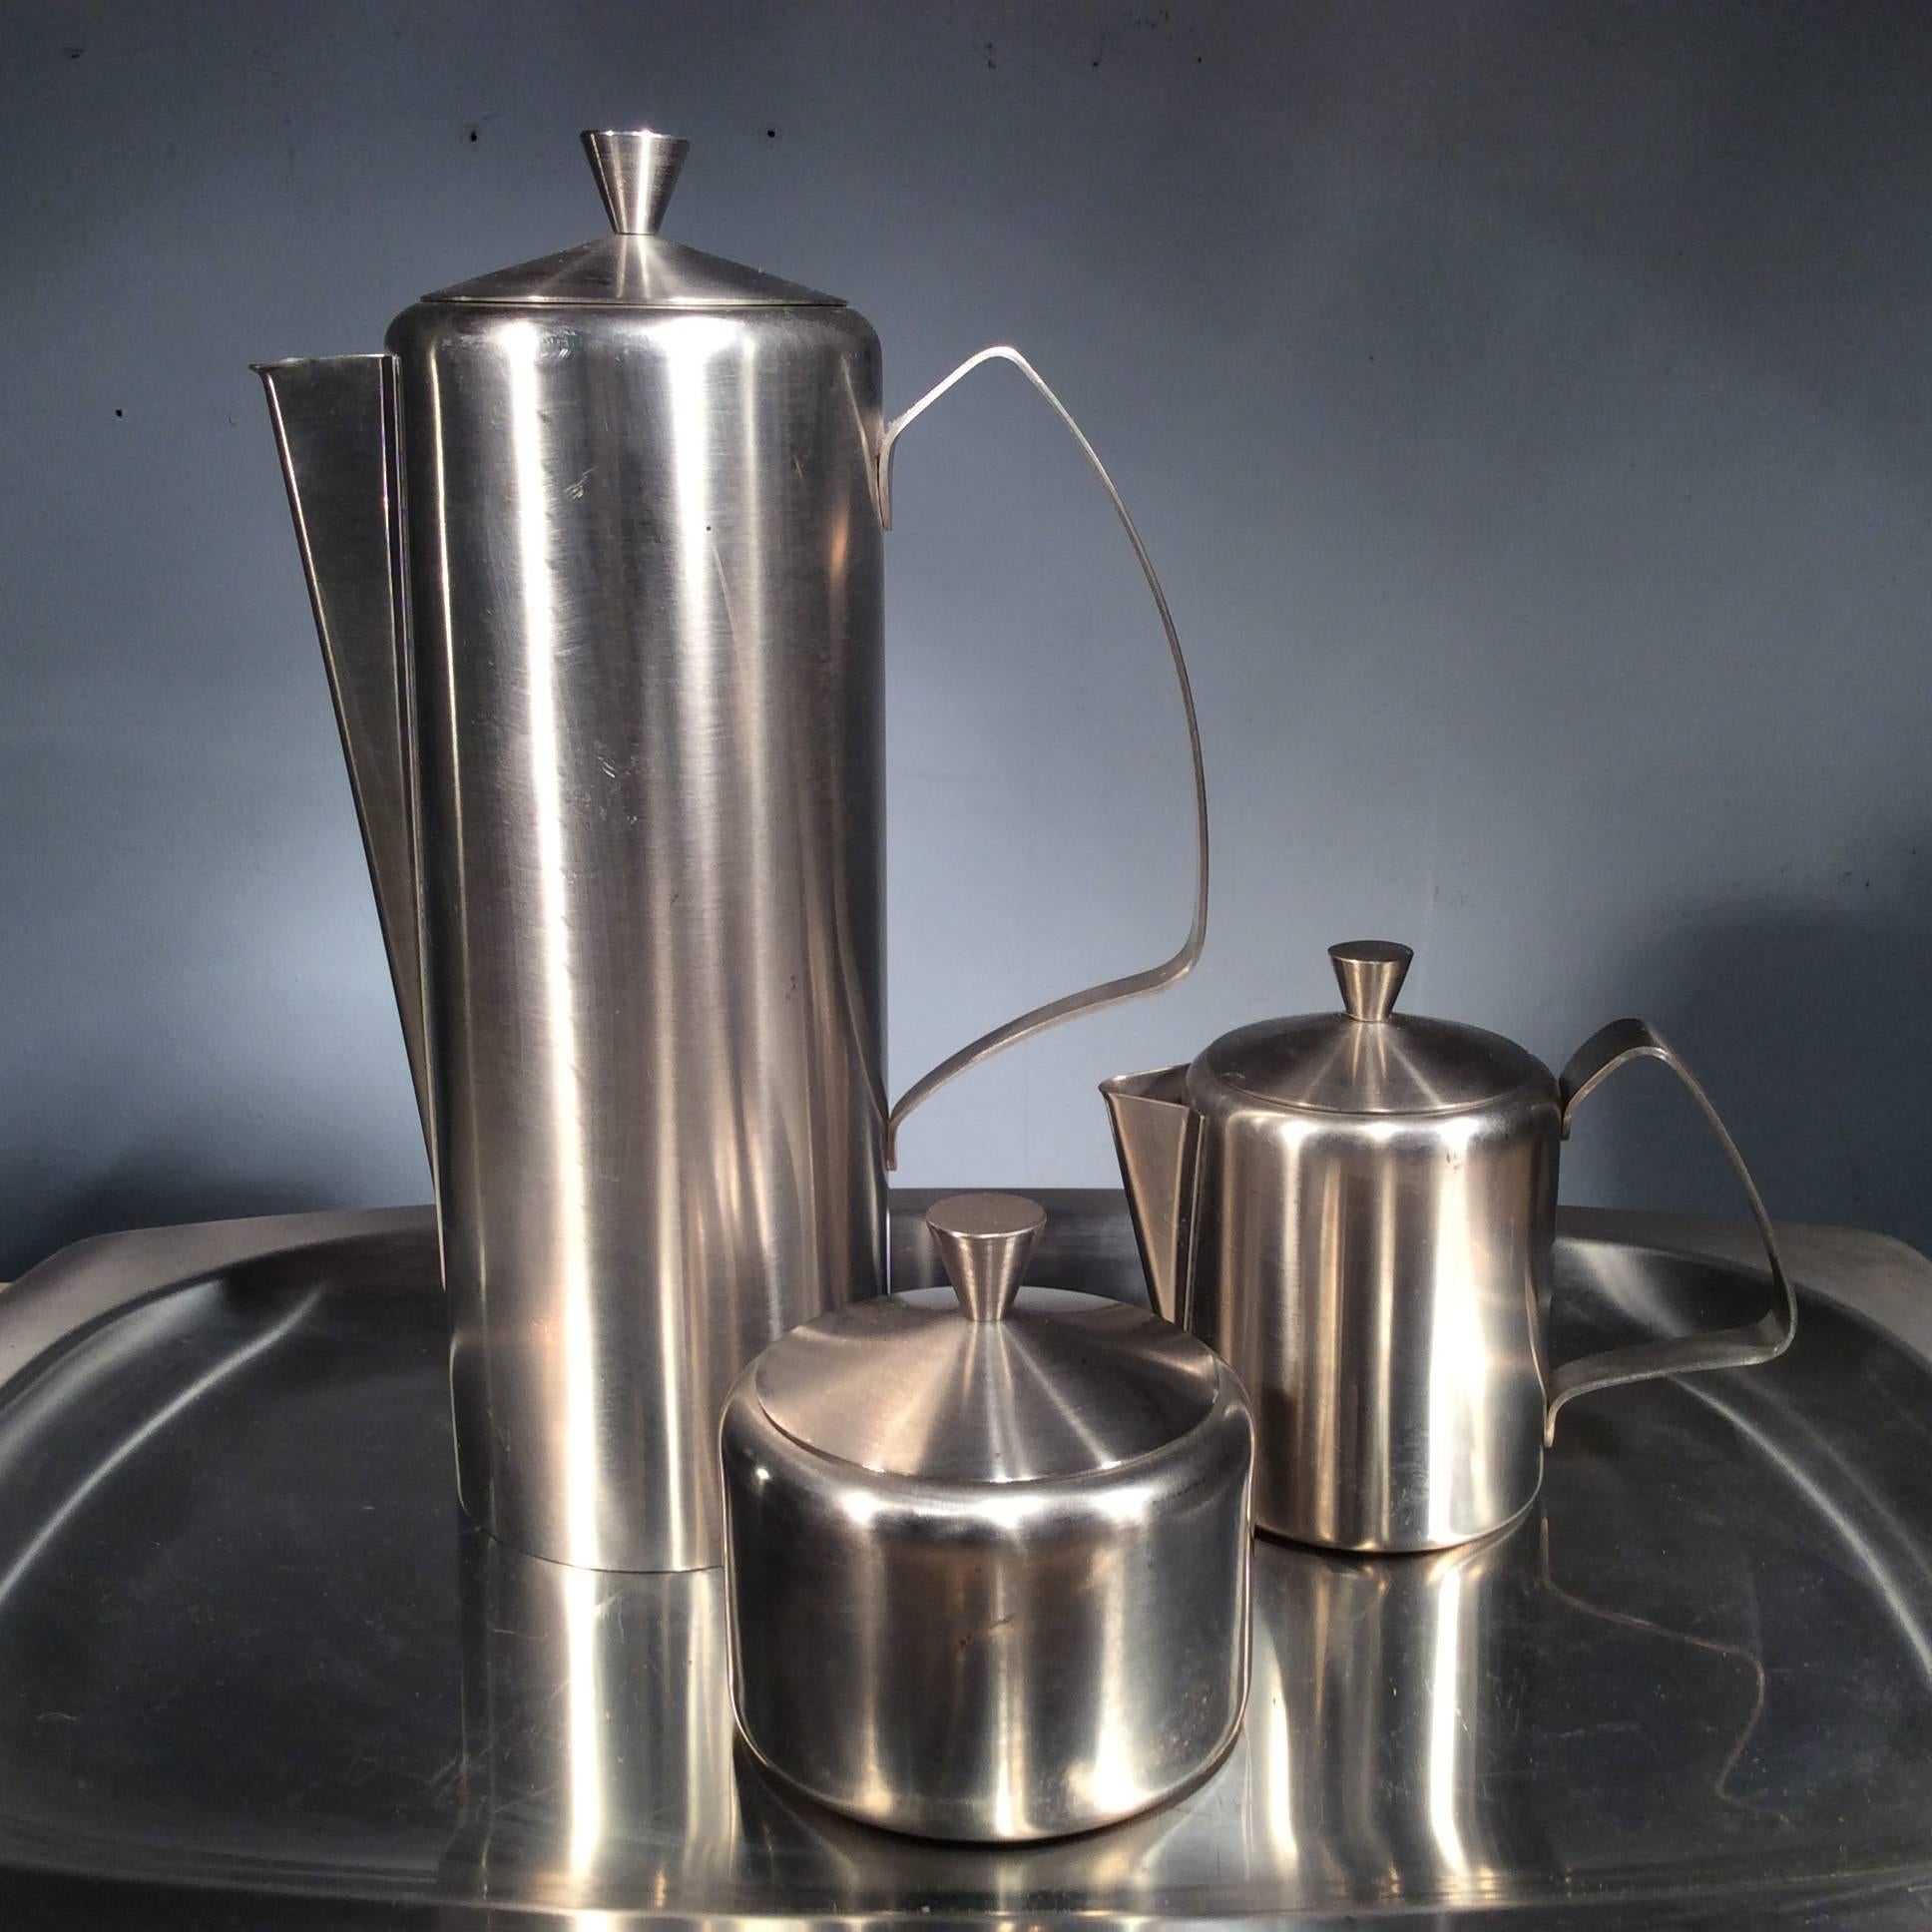 This stunning vintage 1960s stainless steel coffee service is stamped 'made in England' and made by 'Tudor Knight'. 

Complete with an elegant tall coffee pot, milk jug and sugar pot, it screams Mid-Century Modern.

Dimensions:

Tray: Height